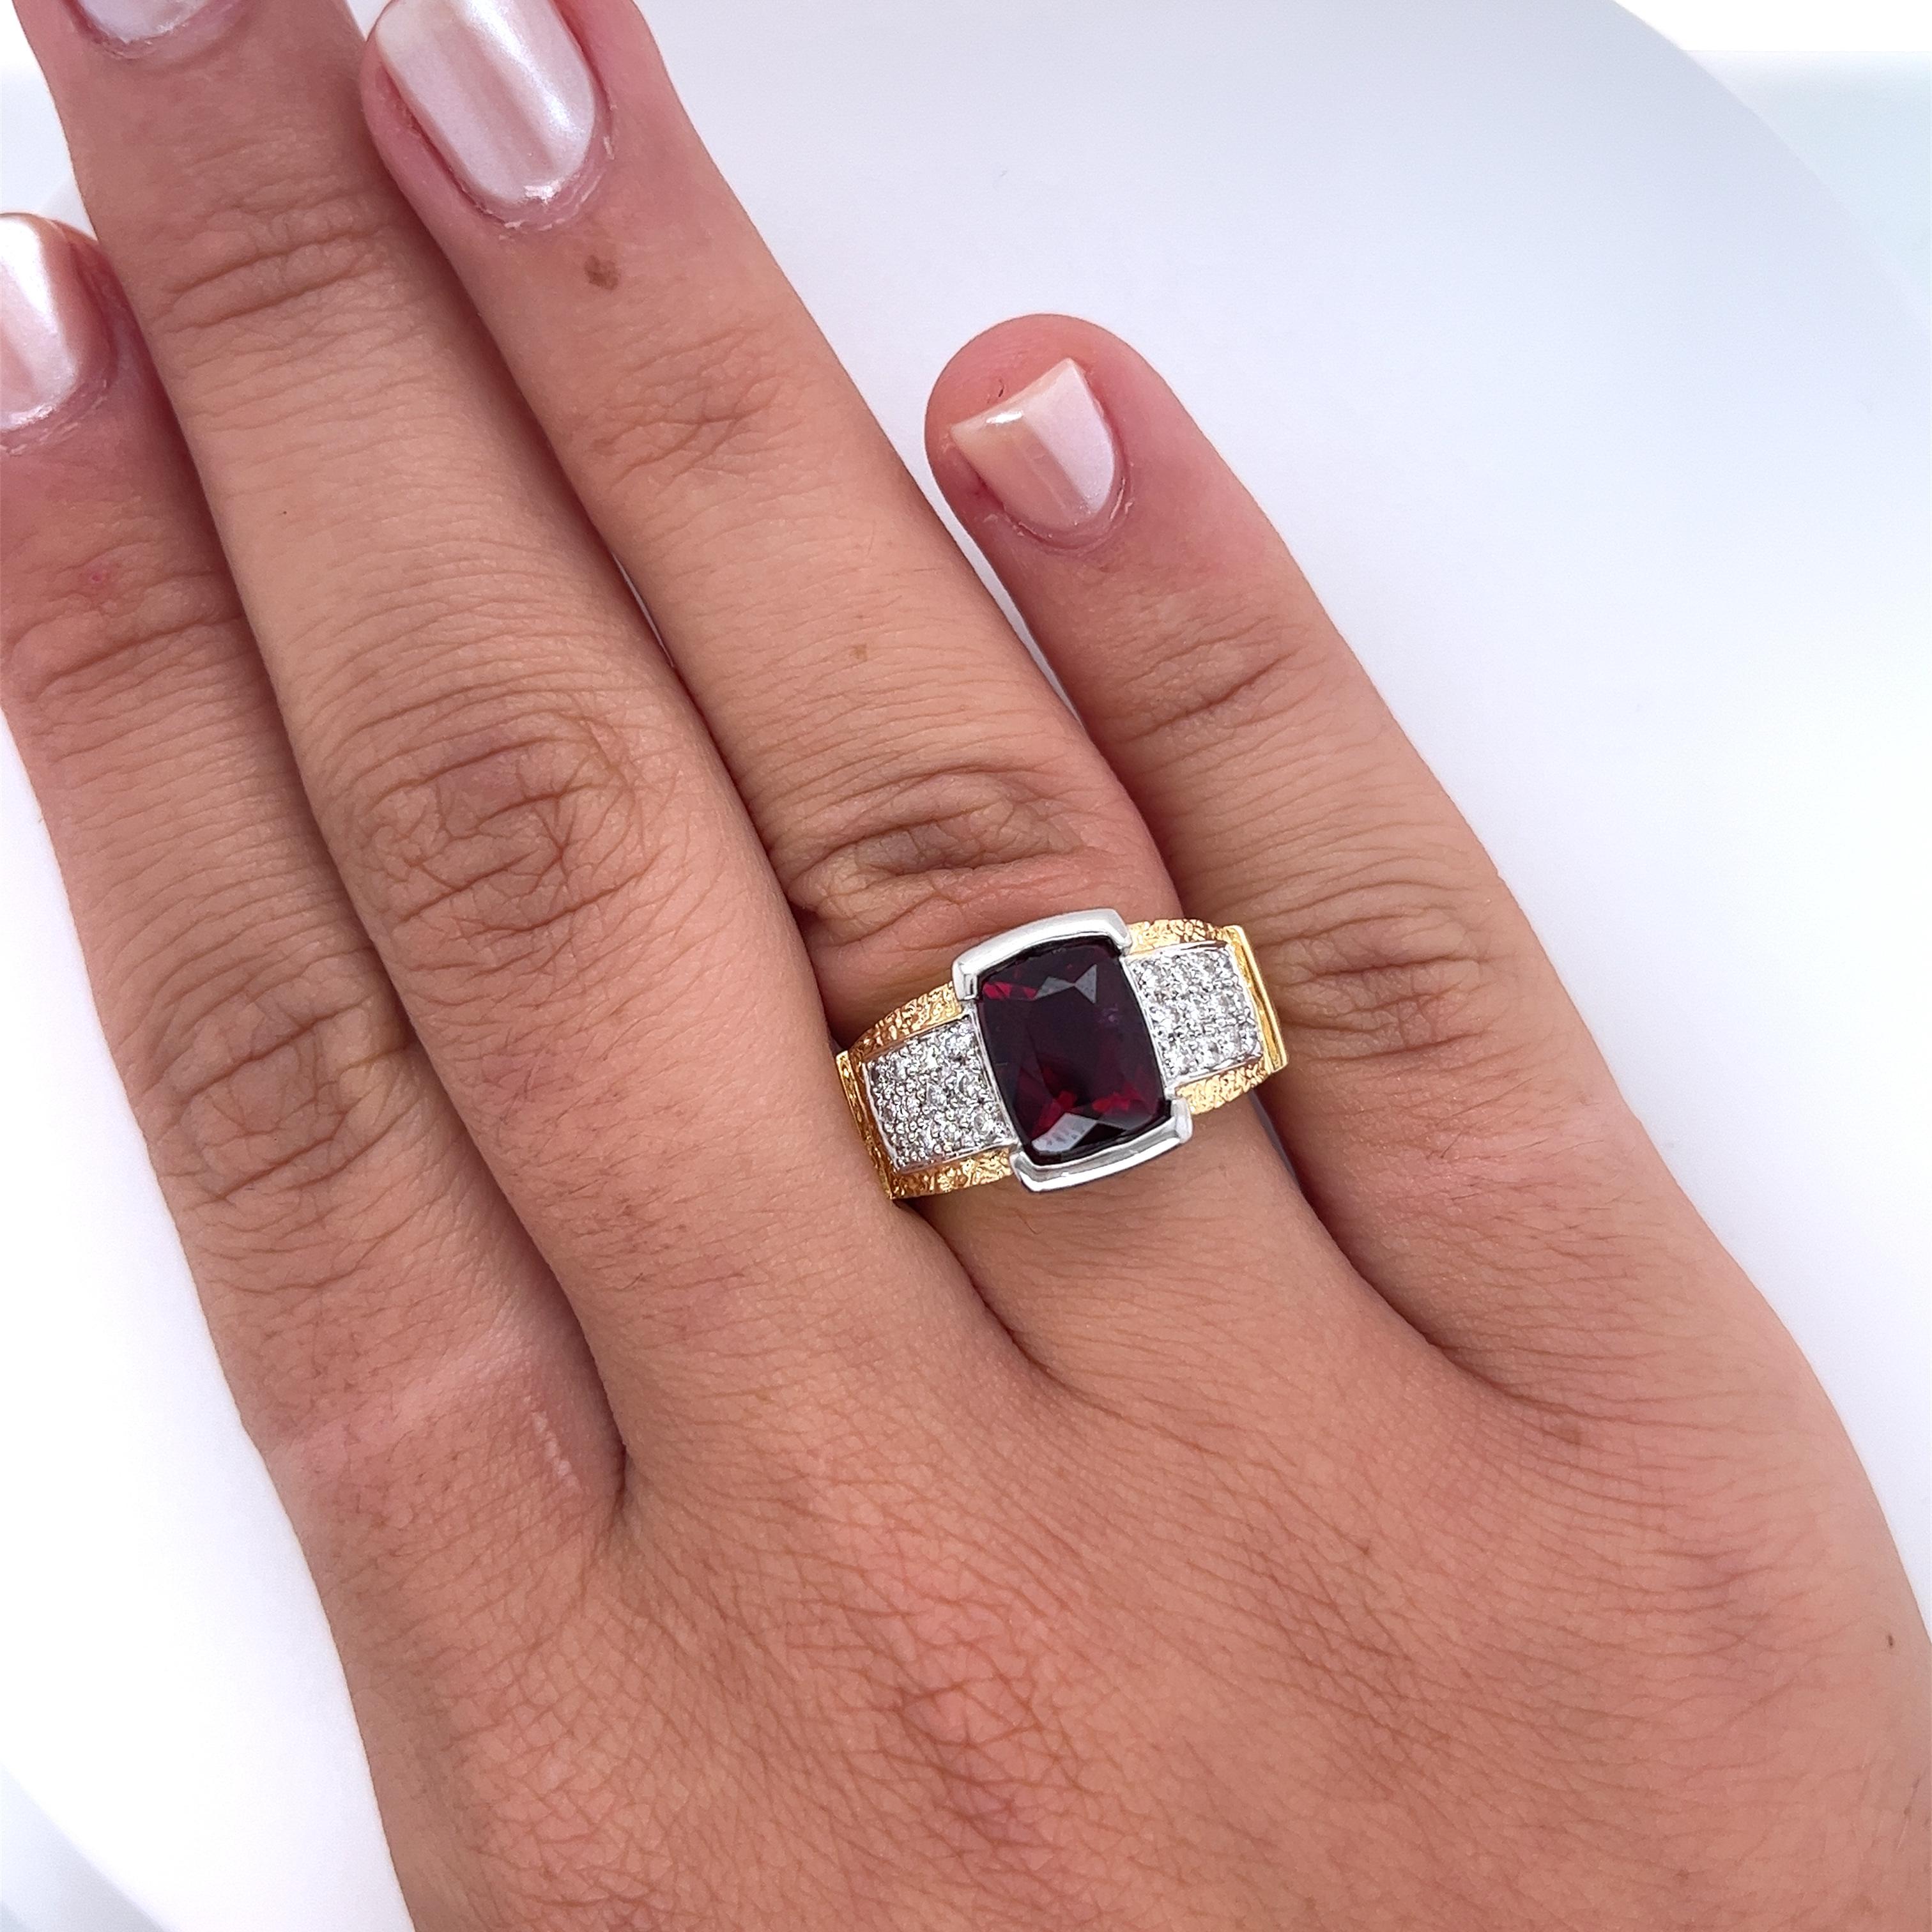 Vintage radiant cut Rubellite Tourmaline and diamond ring in 18k gold and platinum setting. Ideal as a man's pinky ring or a woman's statement ring. This piece features a textured ring shank and a richly saturated center stone. Half bezel set center